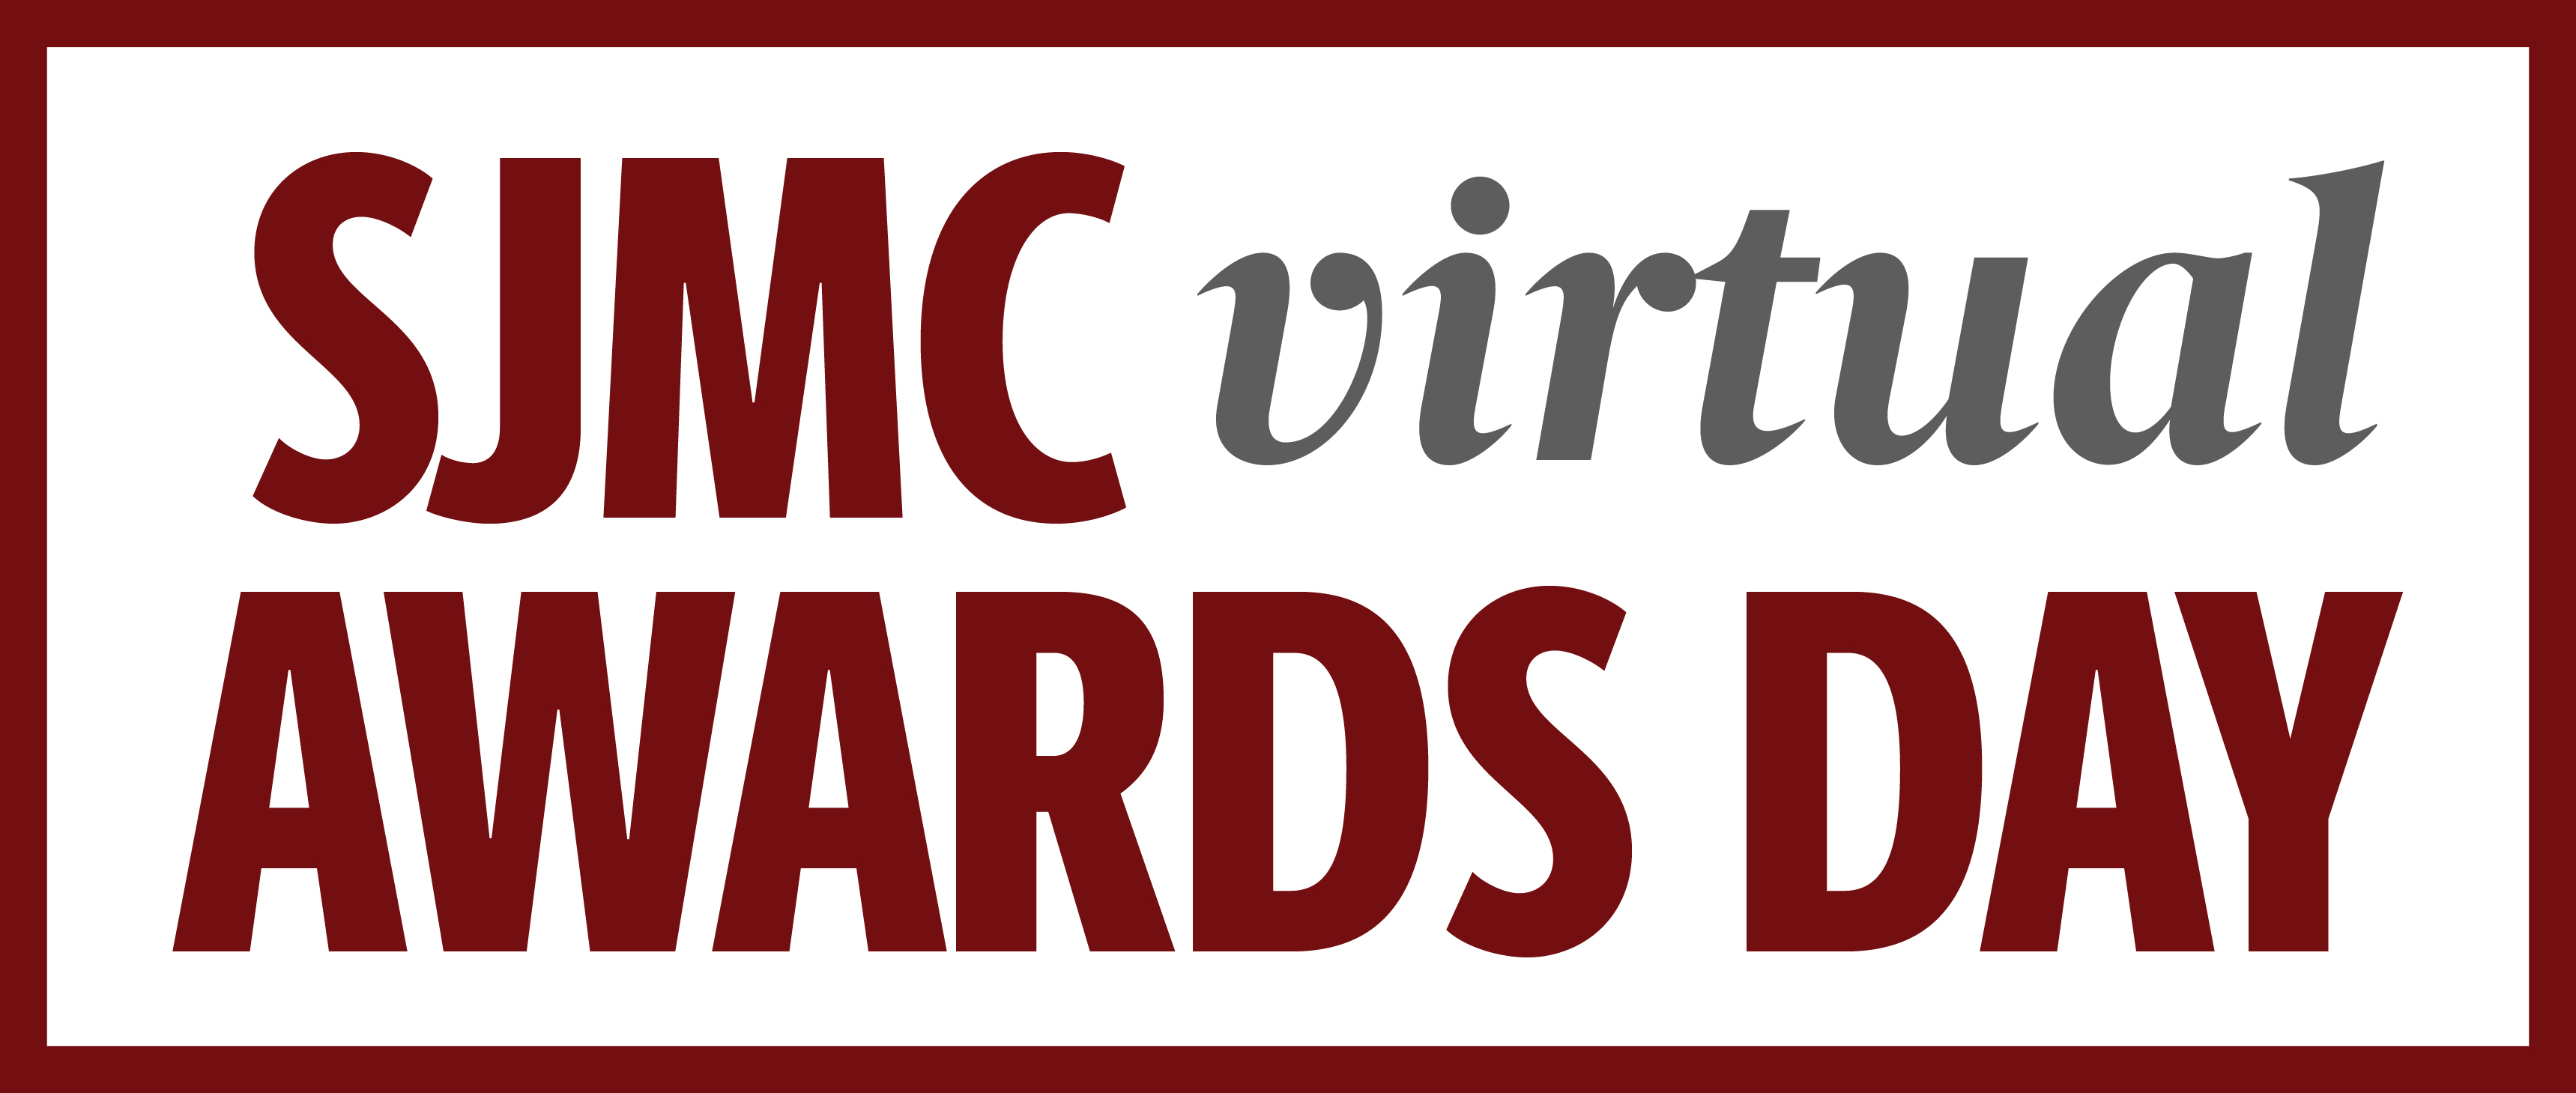 Awards Day graphic